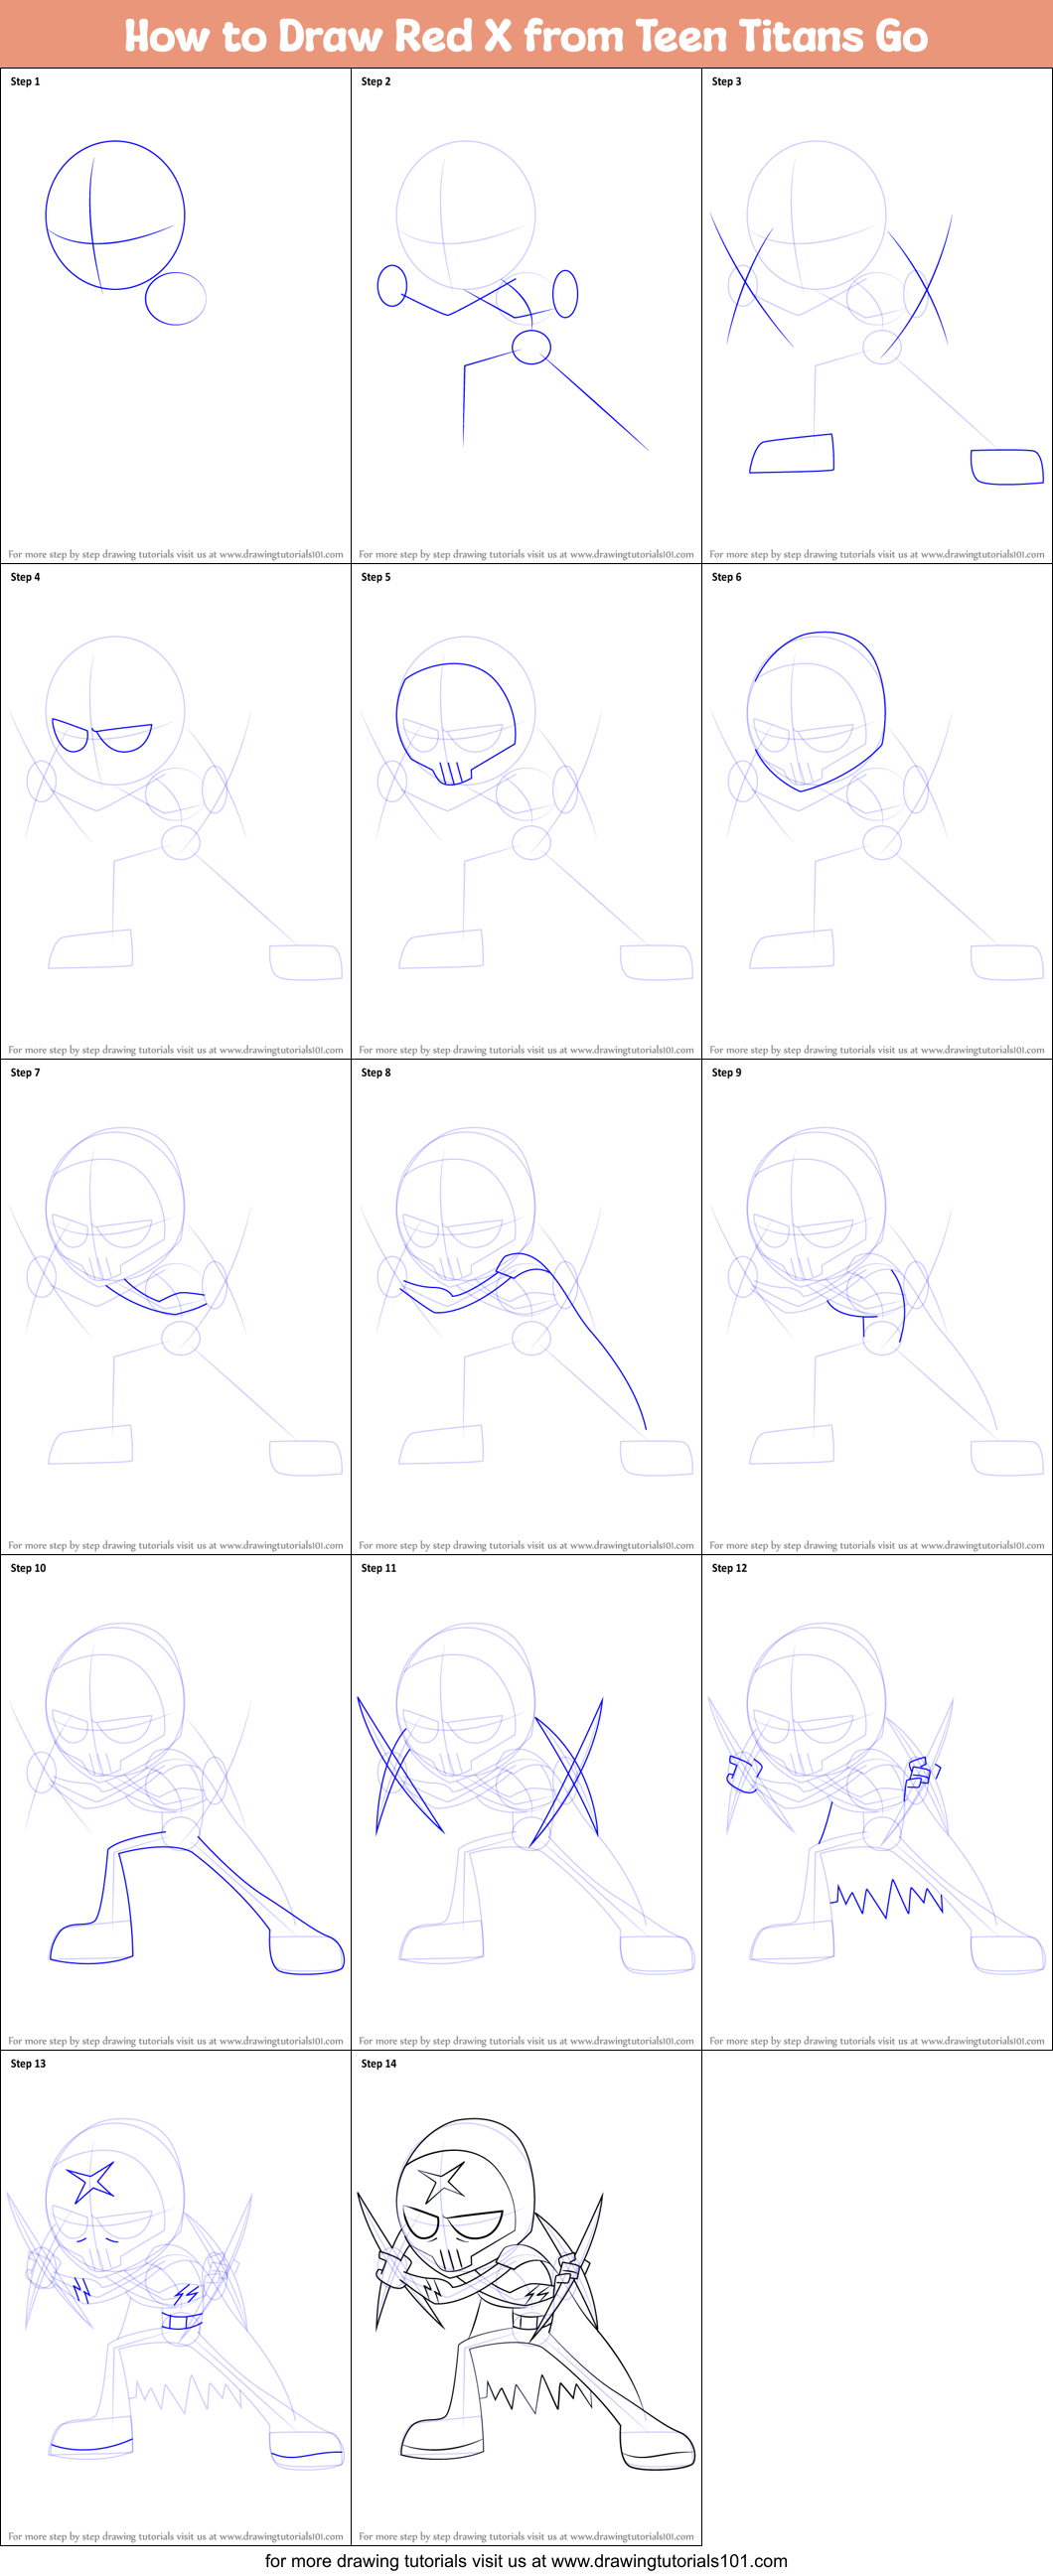 How to Draw Red X from Teen Titans Go printable step by step drawing